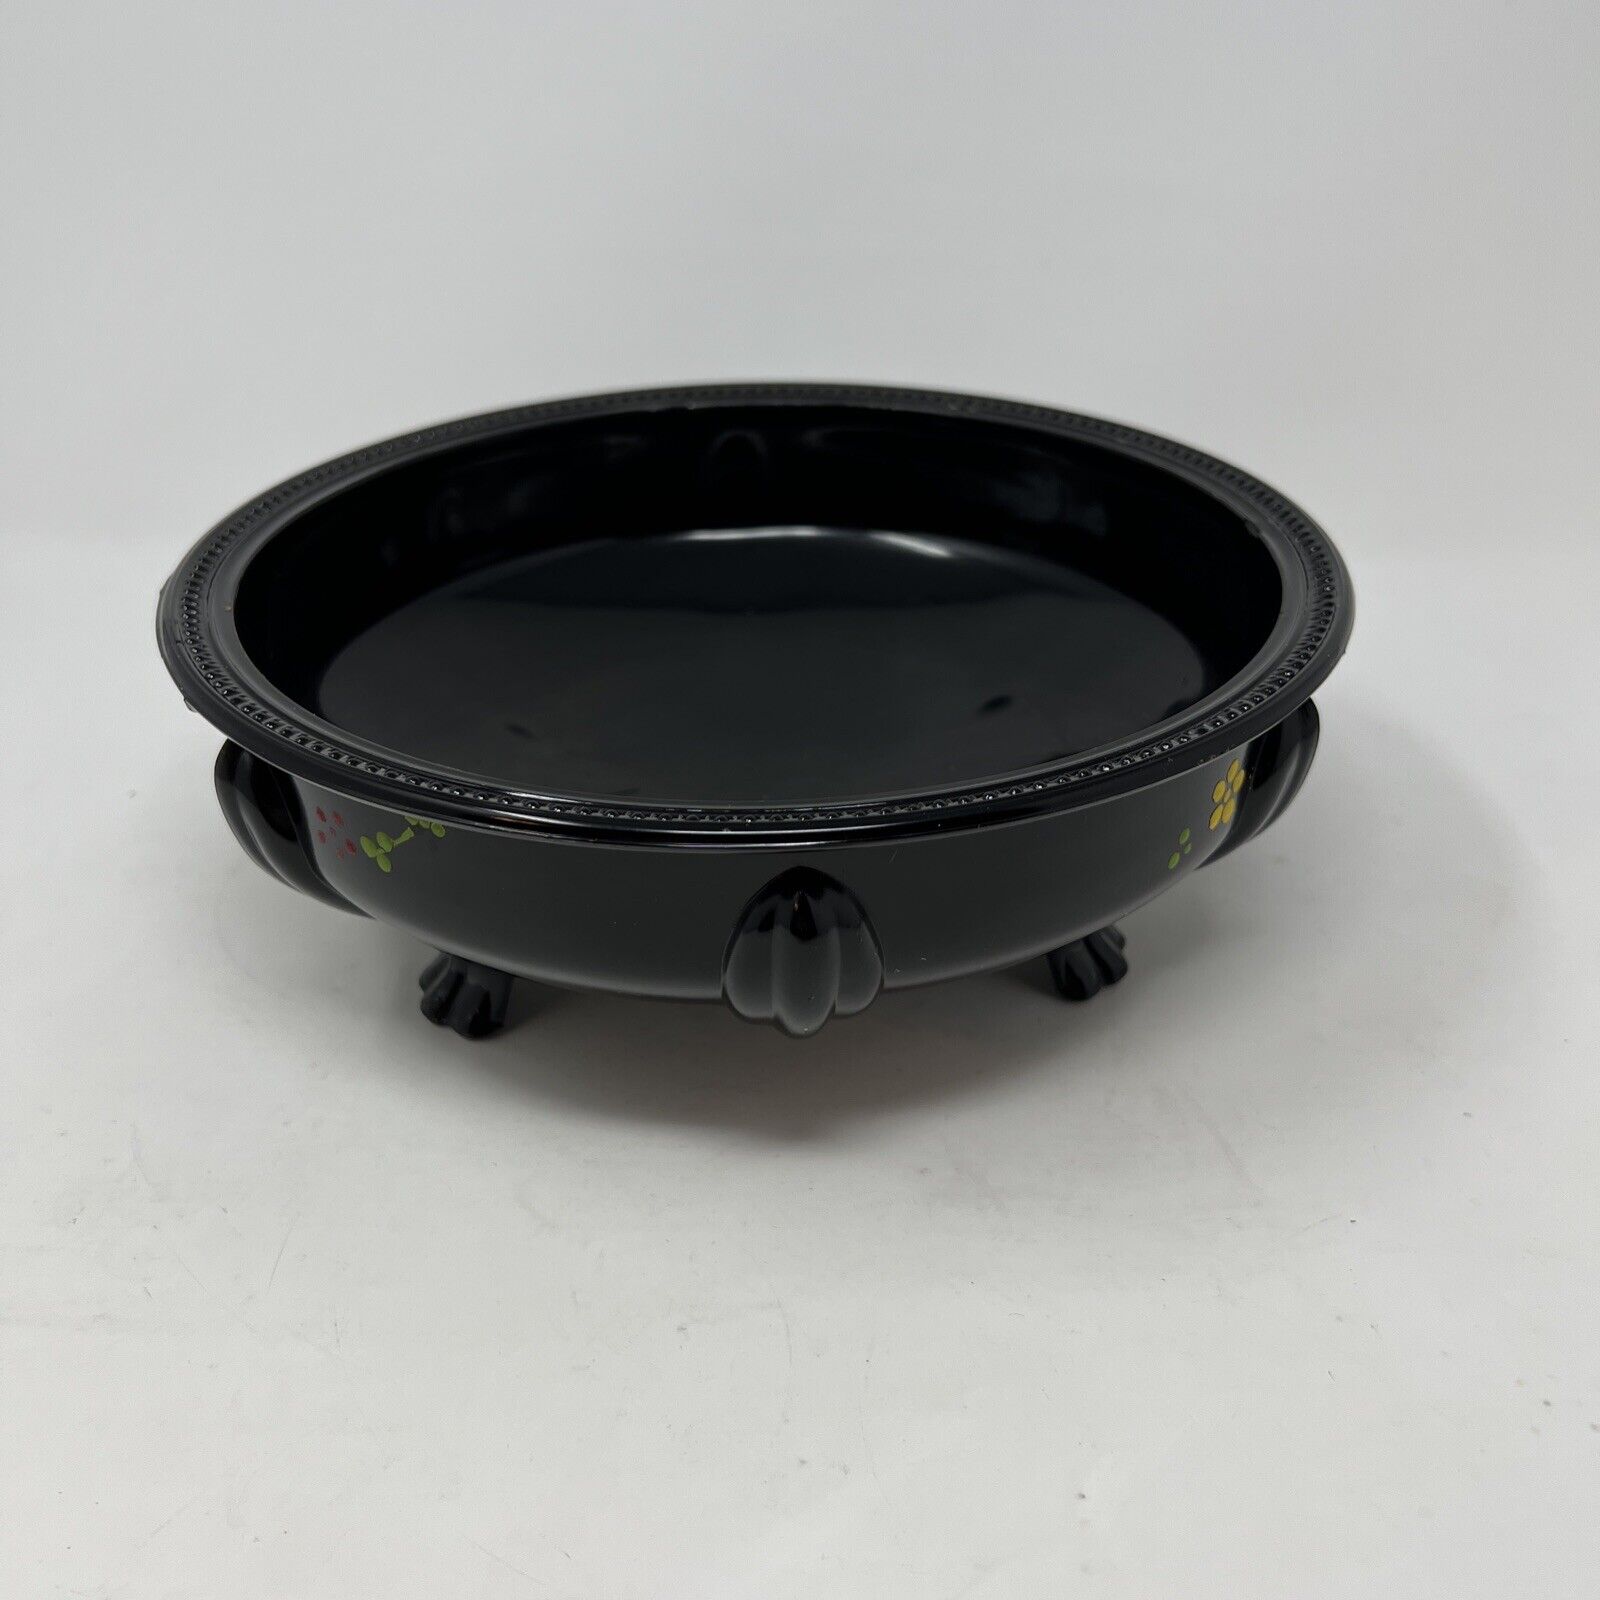 Vintage 1930s LE Smith Art Deco Bowl 3 Footed Black Glass Hand Painted Flowers